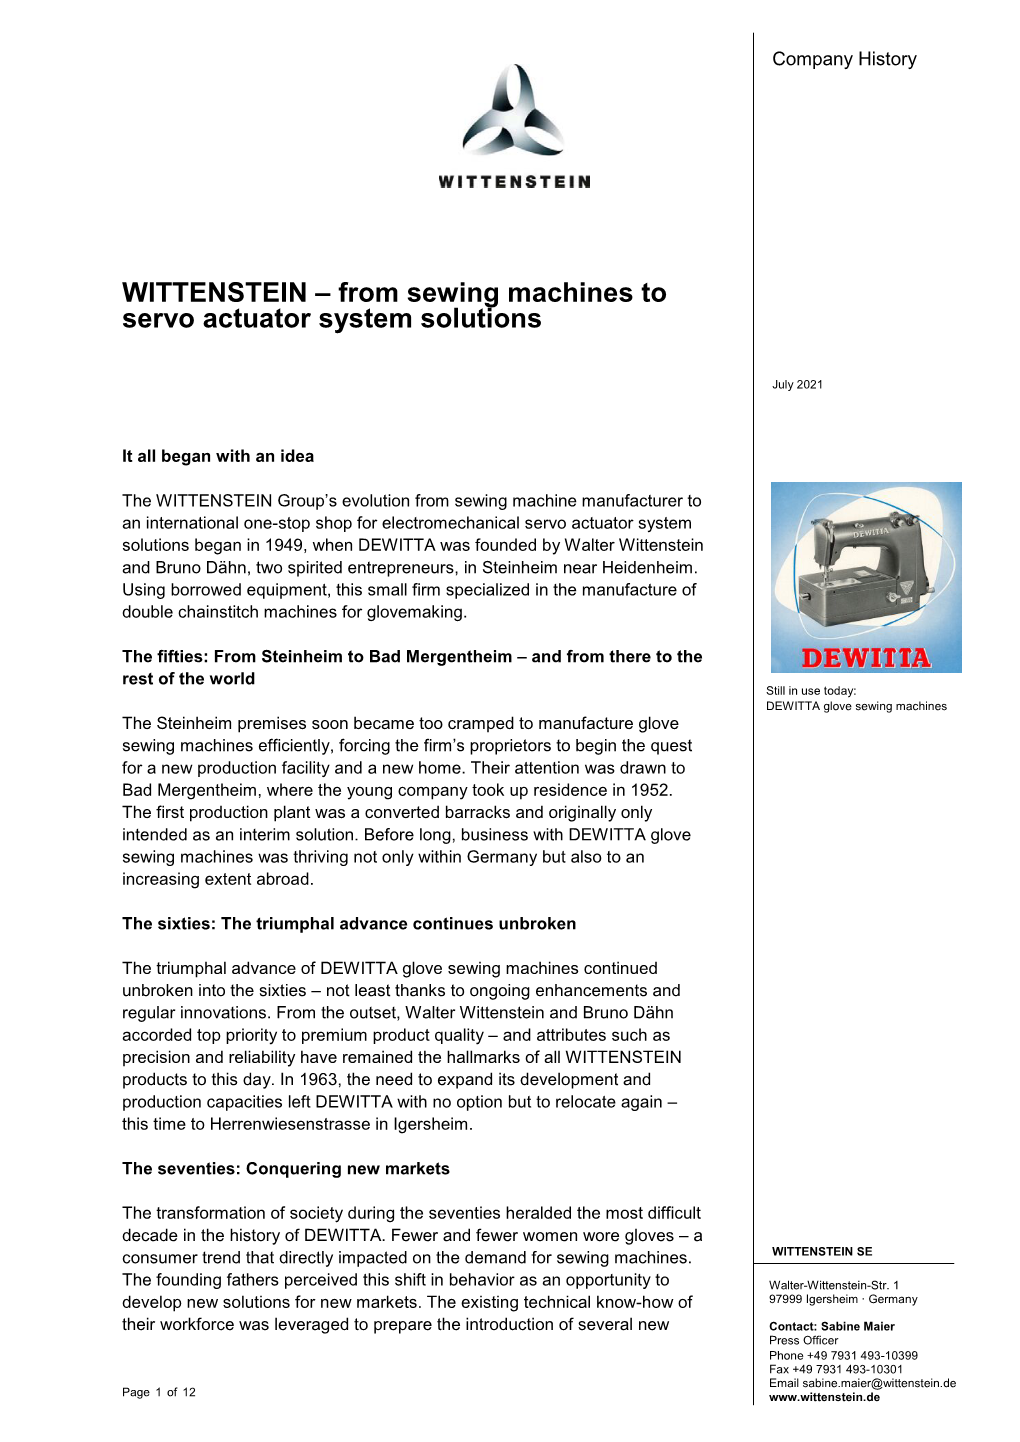 WITTENSTEIN – from Sewing Machines to Servo Actuator System Solutions